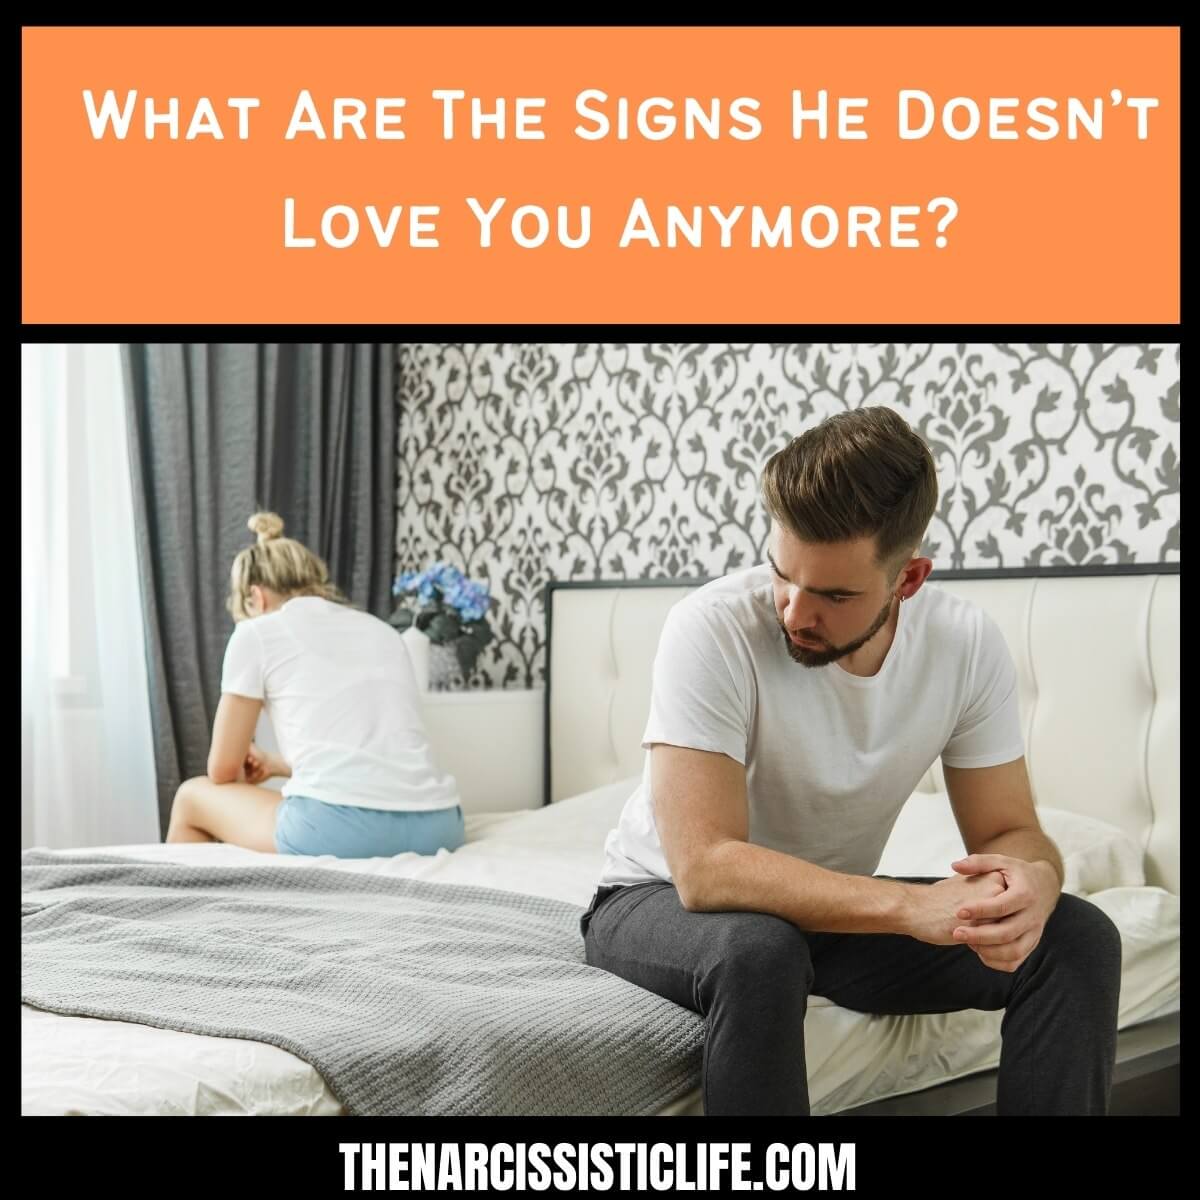 What Are The Signs He Doesn’t Love You Anymore?